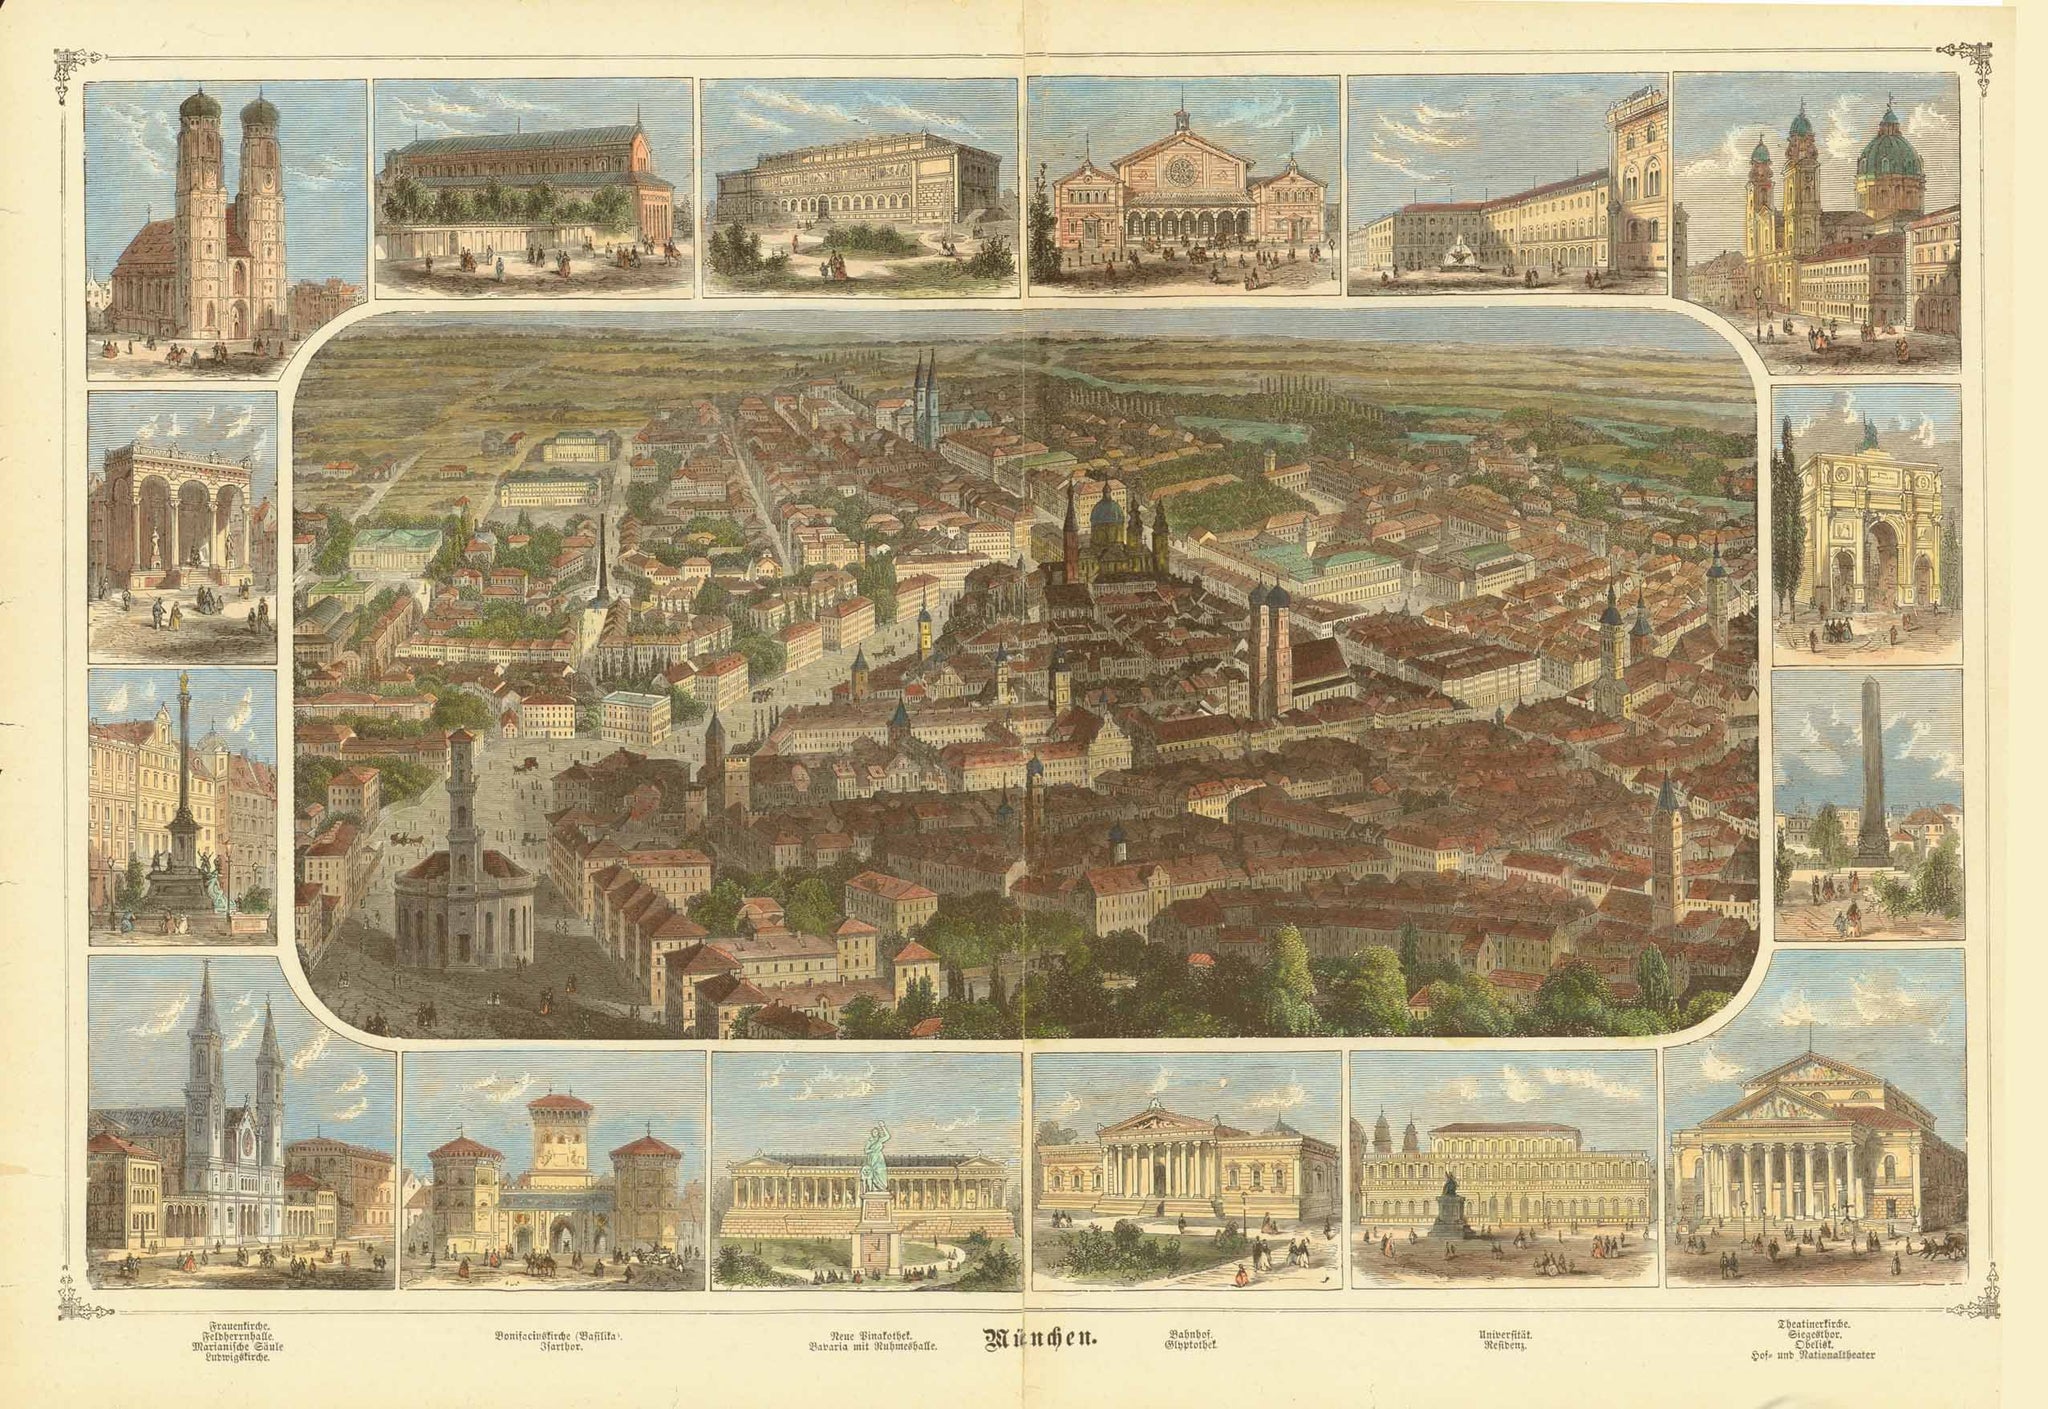 "München"  Wood engraving published 1883. Pleasant hand coloring.  The center image shows central Munich. It is surrounded by images of the most famous monuments, churches and theaters of this lovely Bavarian city.